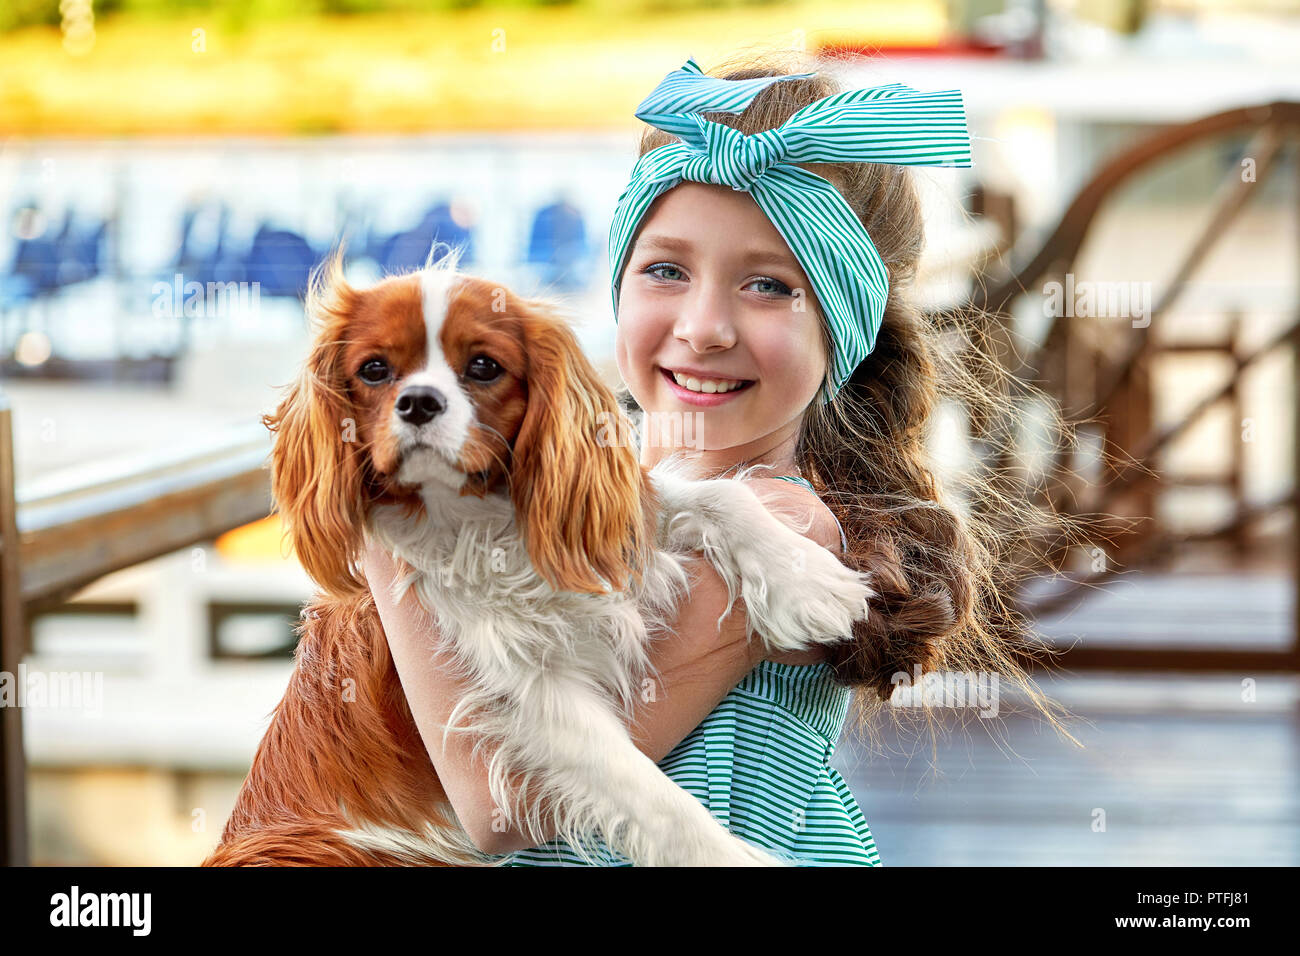 Happy child with dog. Portrait close-up joy face girl hugs puppy breed cocker spaniel, cavalier charles king. Charming cute pet, dog, animal, friendship with kid. Stock Photo